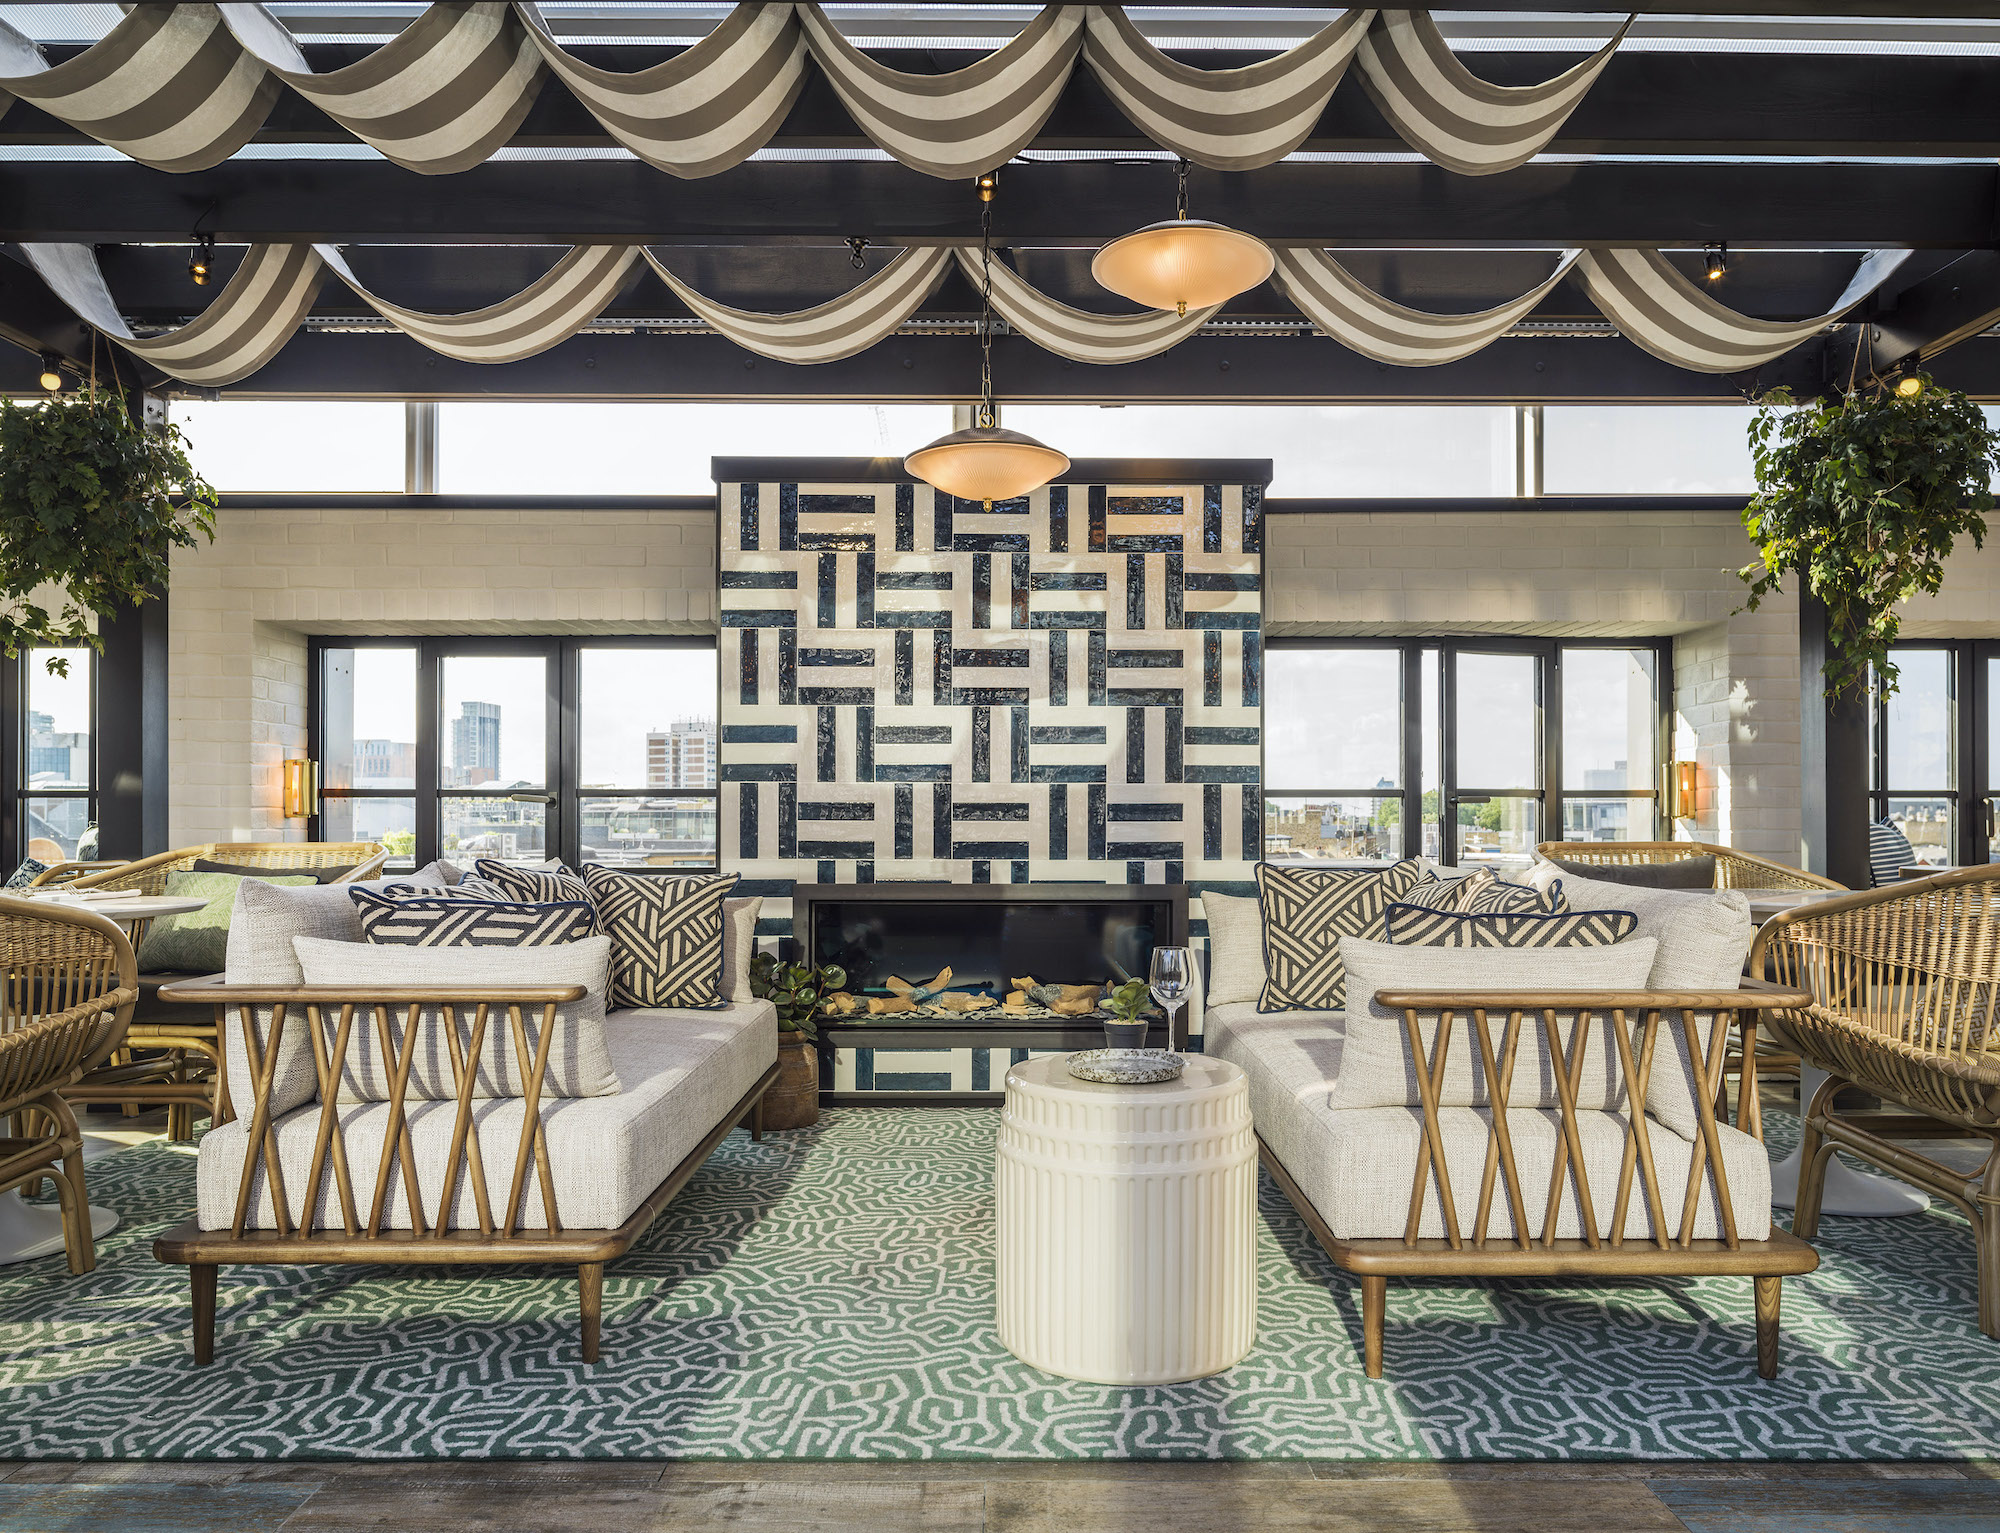 Geometric patterns and bentwood furniture lend 1950s glamour to the Mondrian hotel in Shoreditch, London, interior designed by Goddard LIttlefair